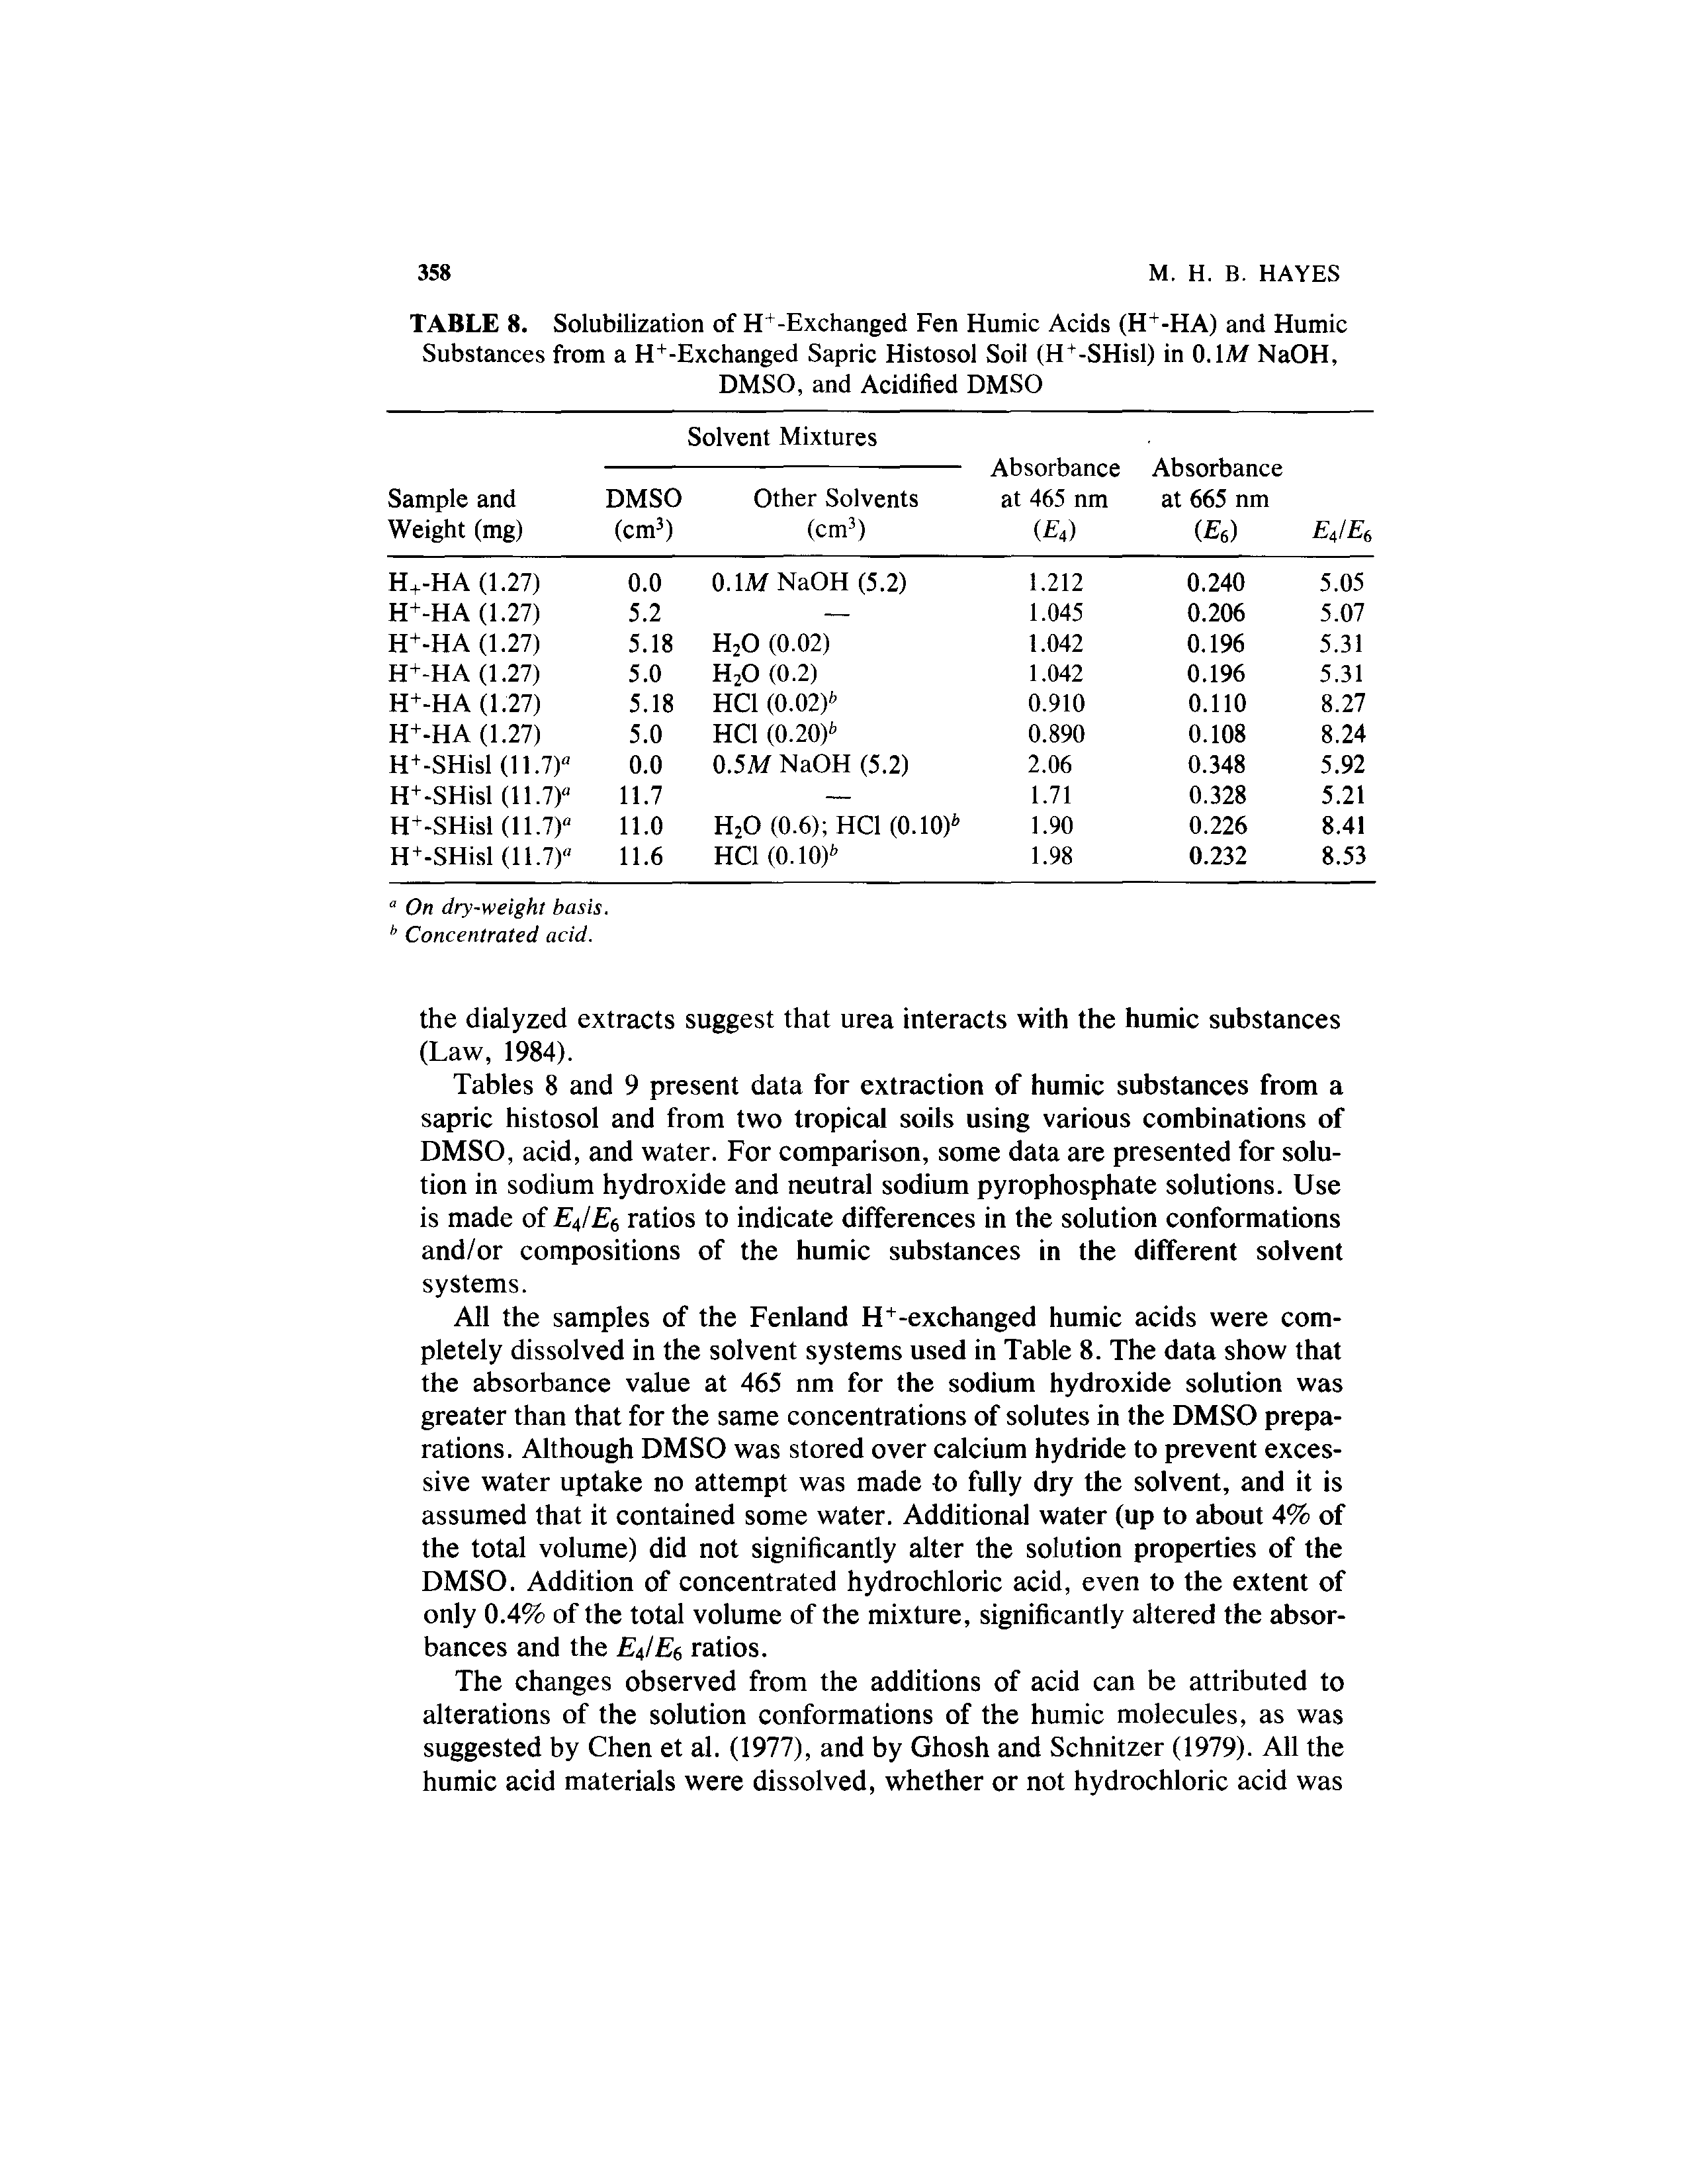 Tables 8 and 9 present data for extraction of humic substances from a sapric histosol and from two tropical soils using various combinations of DMSO, acid, and water. For comparison, some data are presented for solution in sodium hydroxide and neutral sodium pyrophosphate solutions. Use is made of EJEf, ratios to indicate differences in the solution conformations and/or compositions of the humic substances in the different solvent systems.